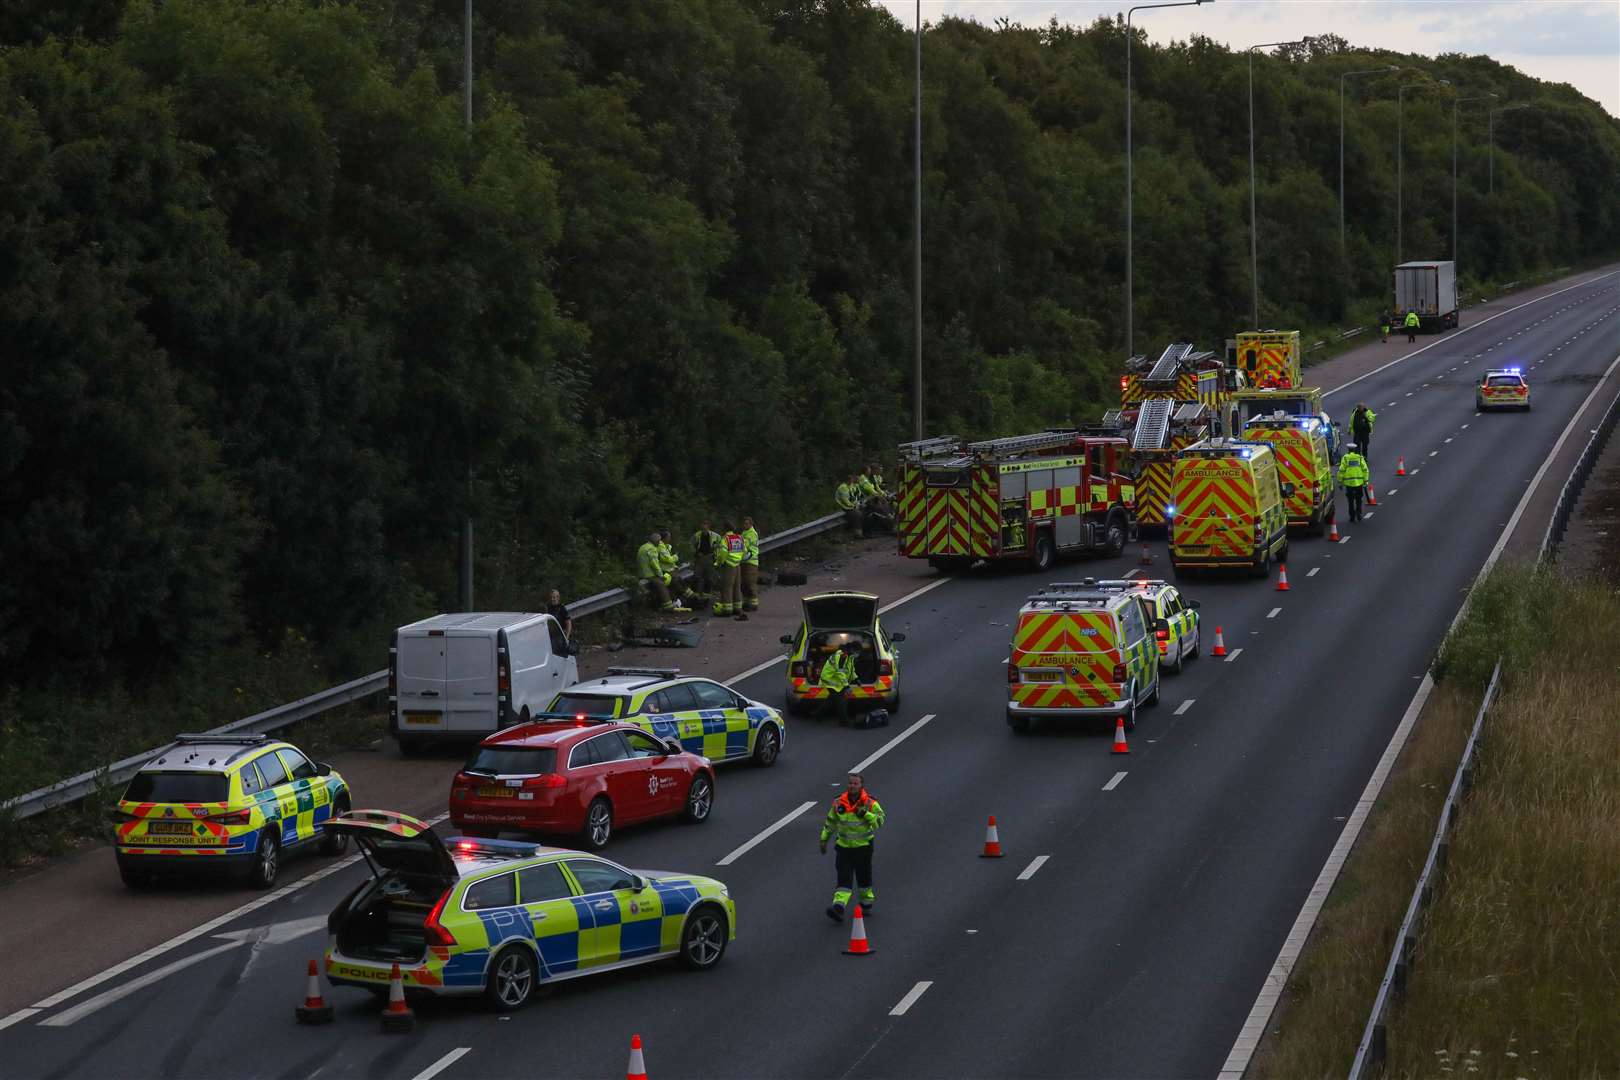 Emergency services on the M2 Picture: UKNIP